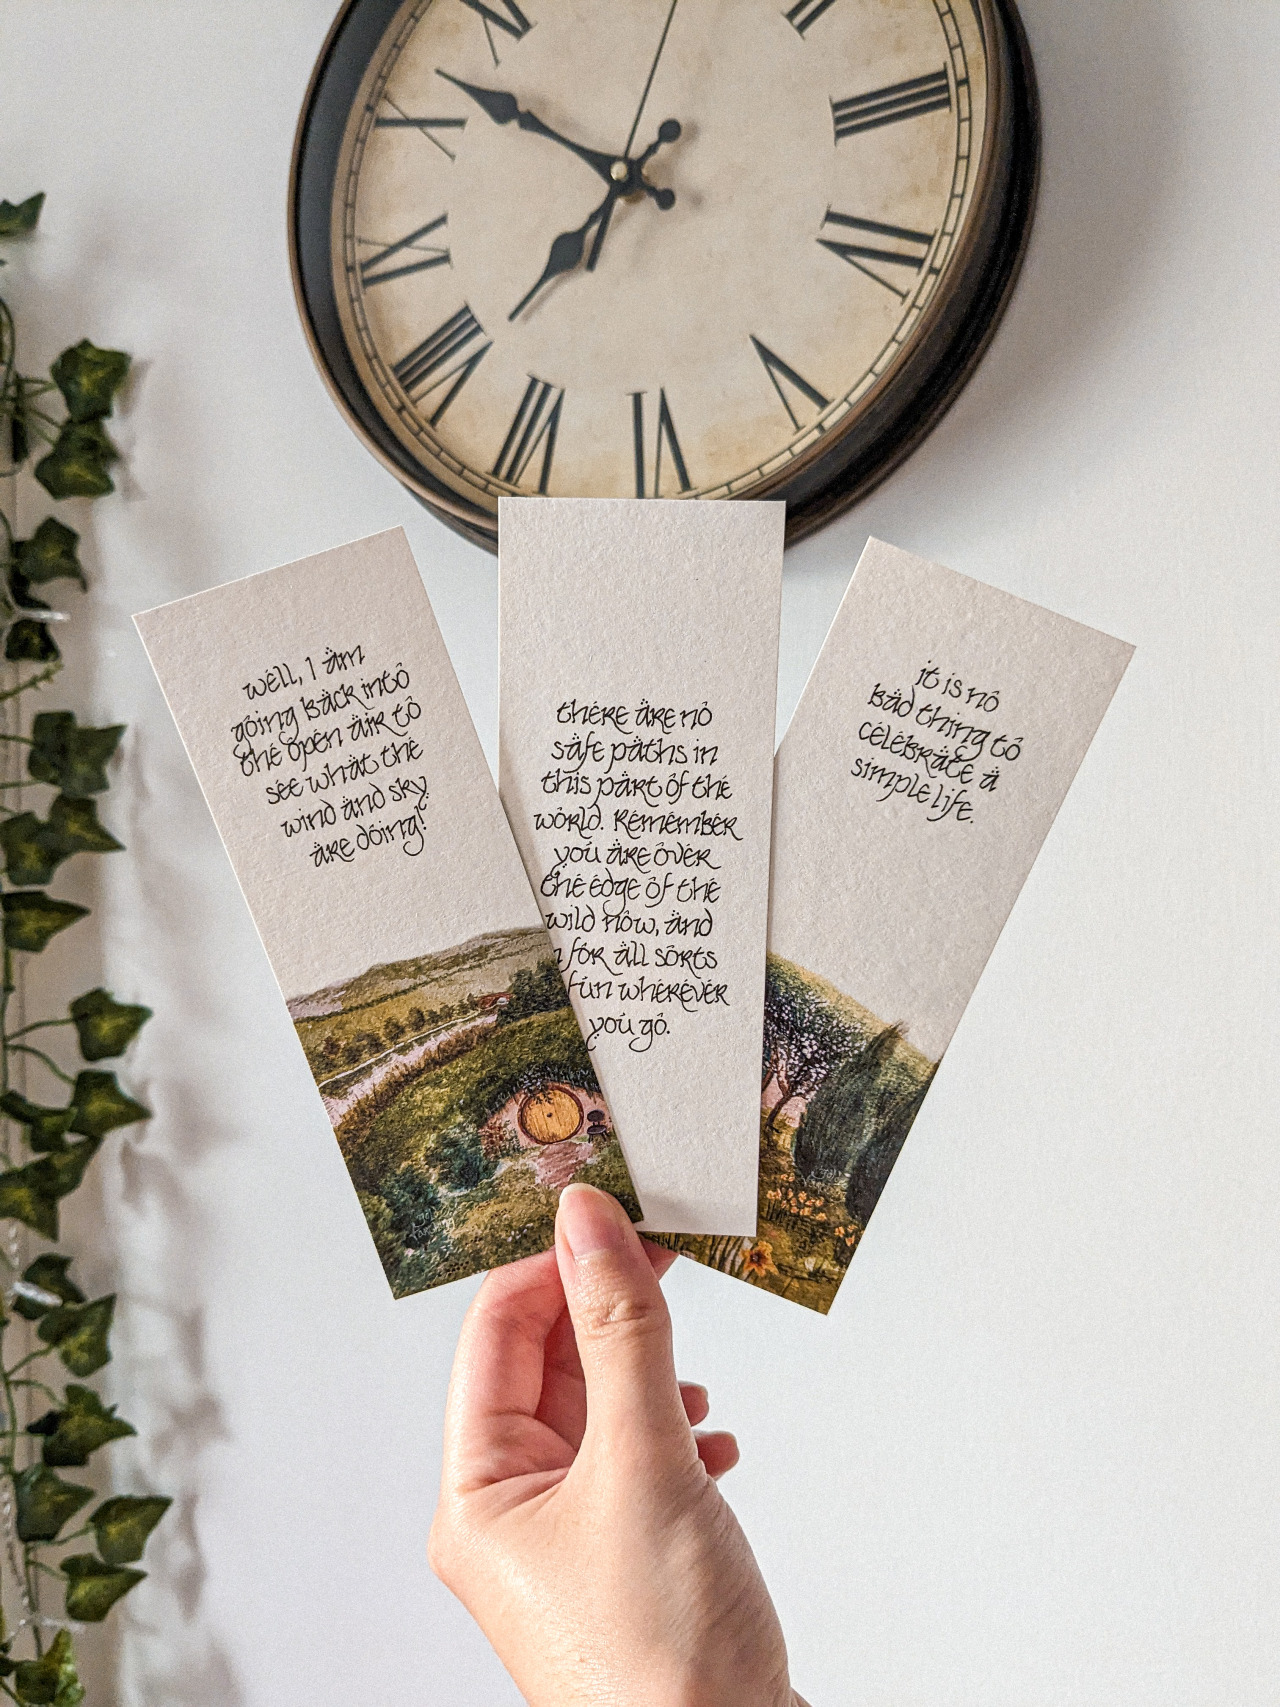 The Hobbit Lord of the Rings Inspired J. R. R. Tolkien Bookmark